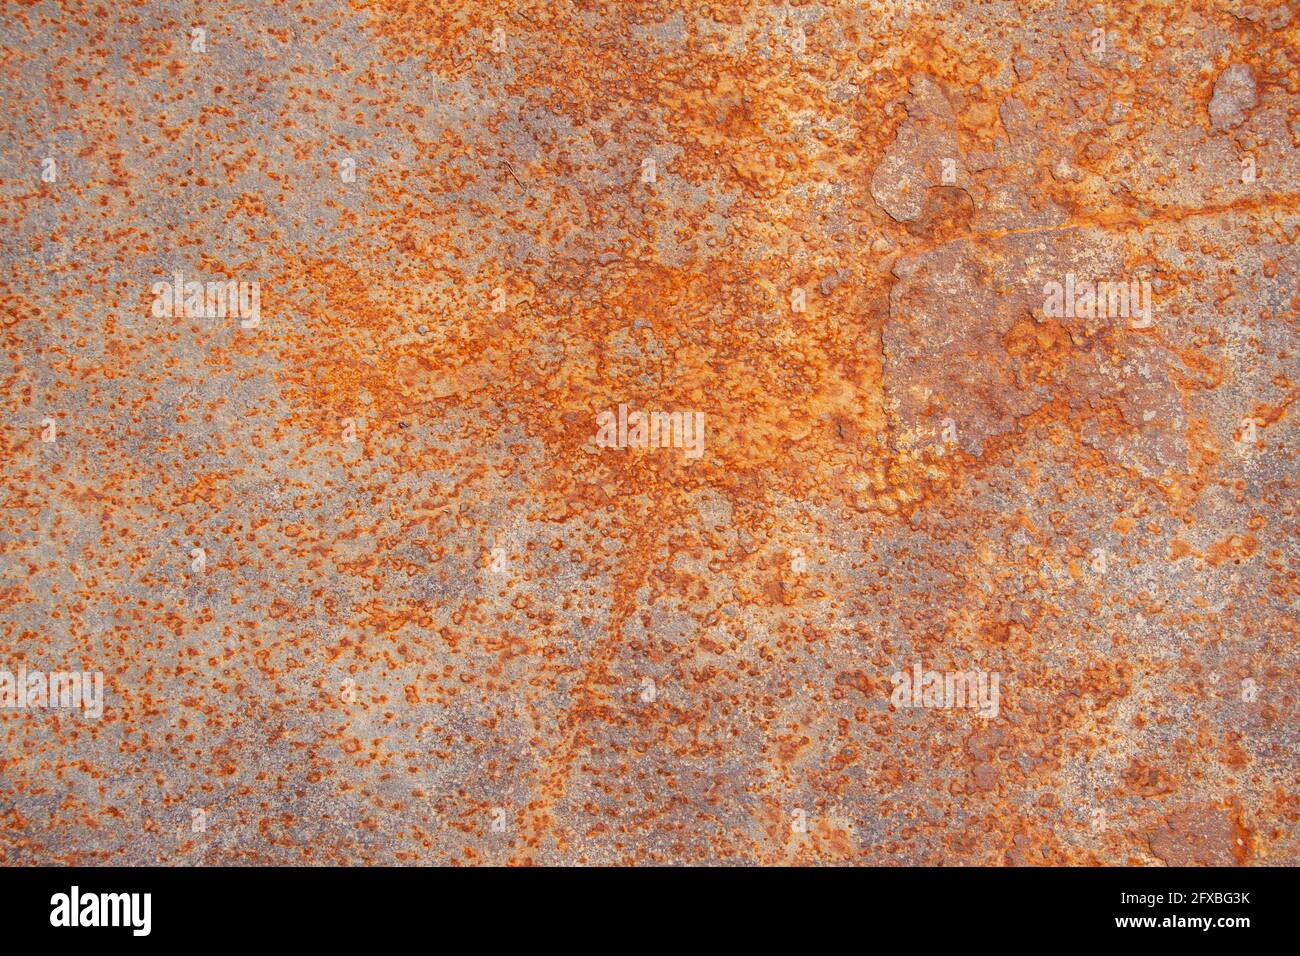 Rustic background with old steel plate texture of rusty metal. Industrial metal texture. Grunge rust background Stock Photo